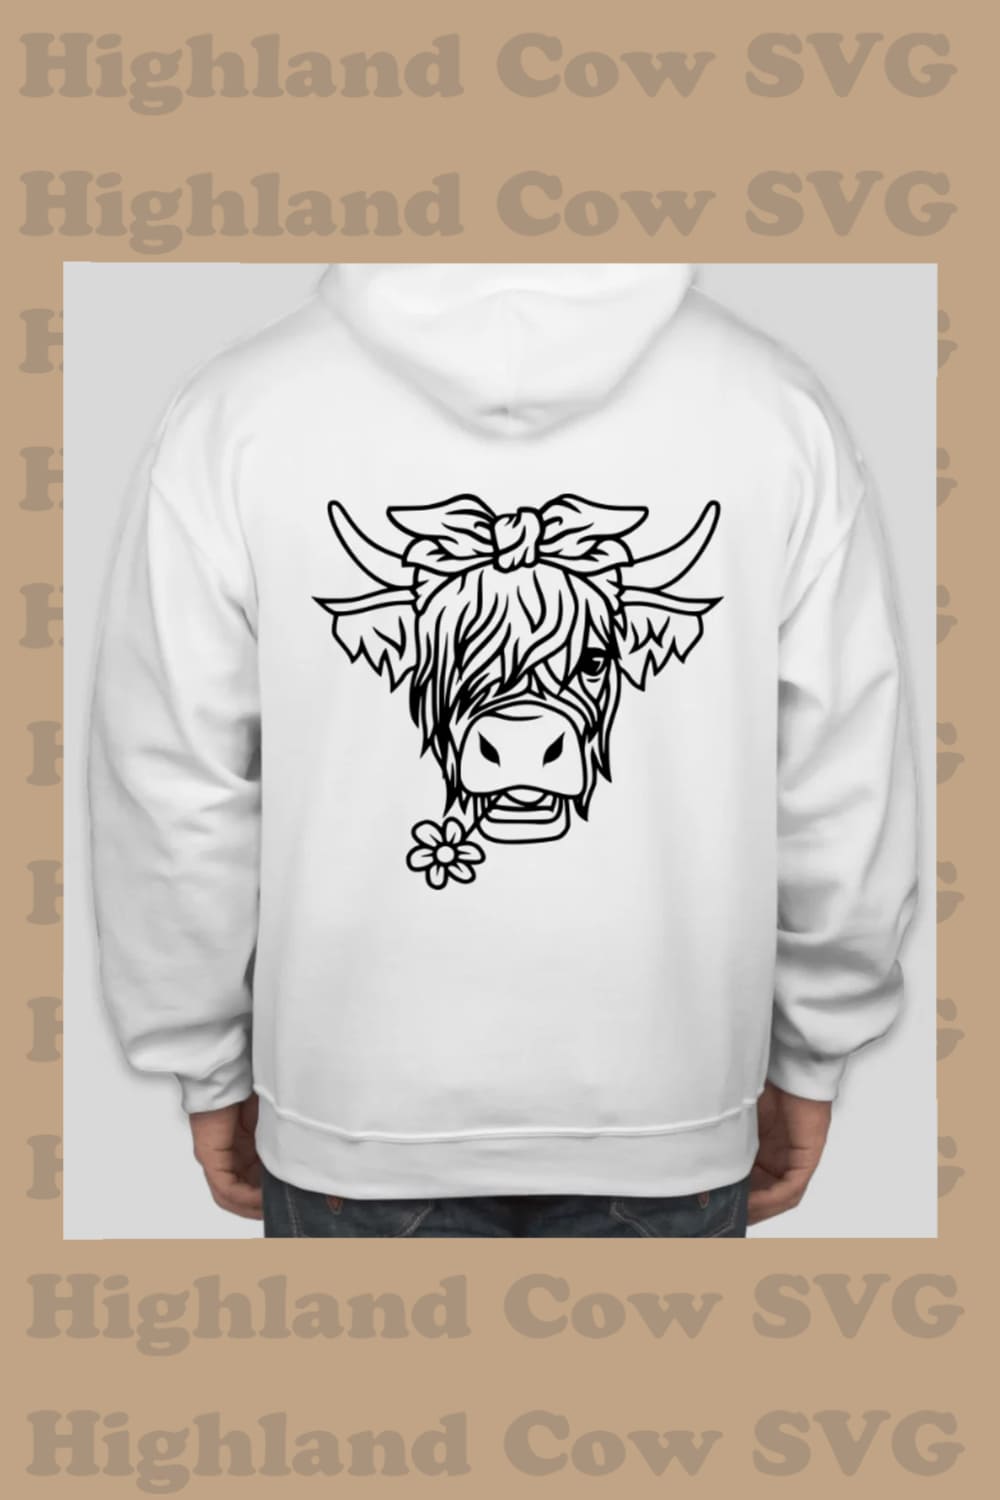 Man wearing a white hoodie with a cow on it.